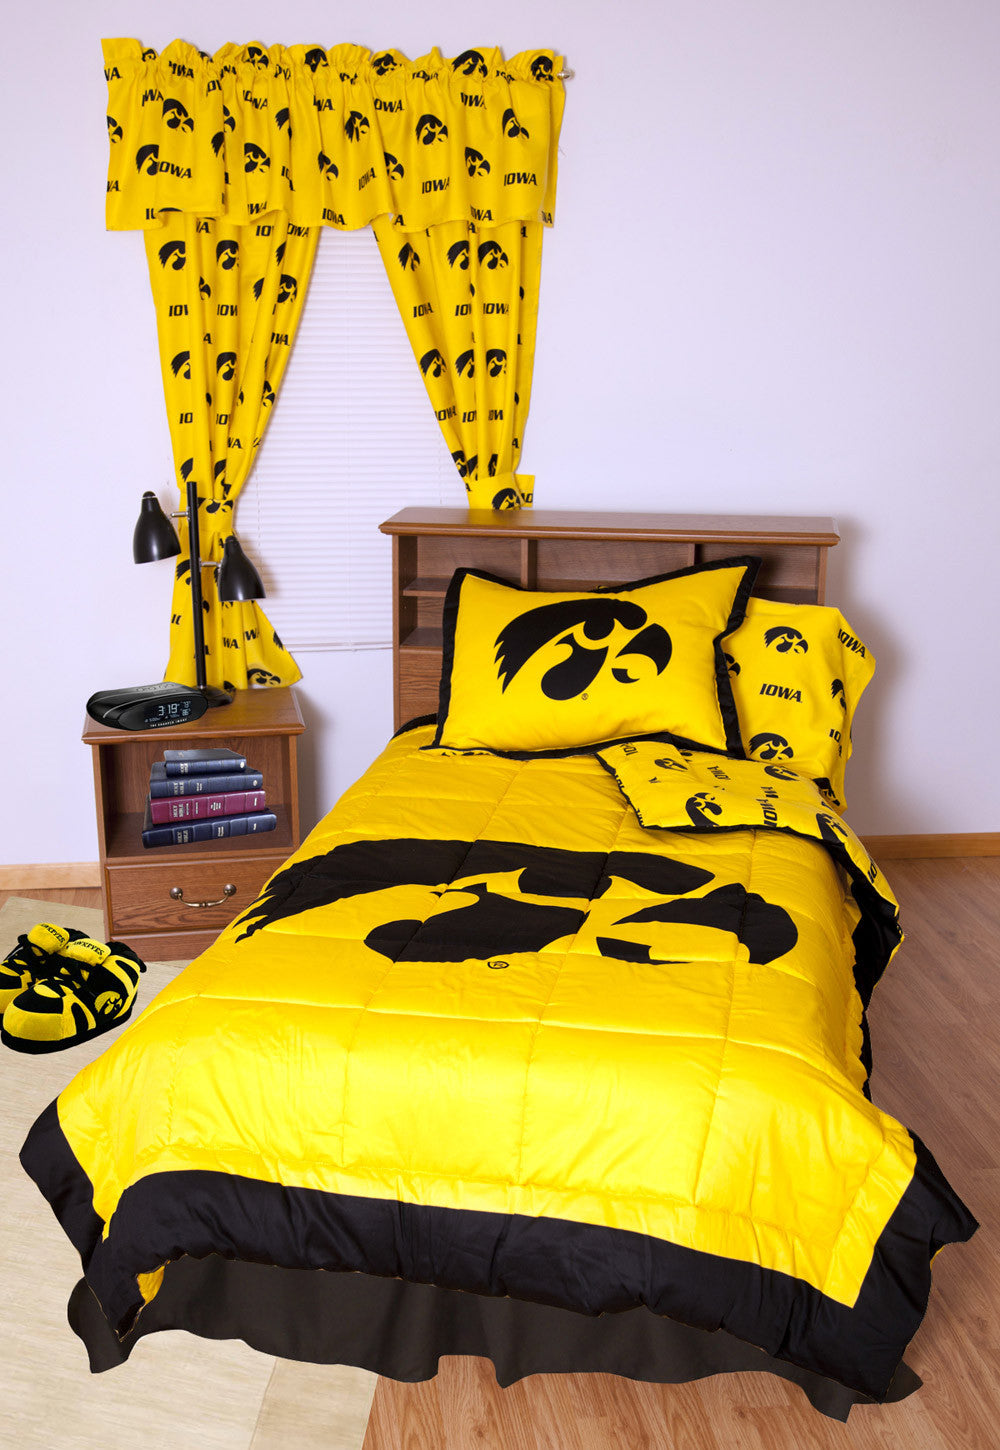 Iowa Bed In A Bag Twin - With Team Colored Sheets - Iowbbtw By College Covers